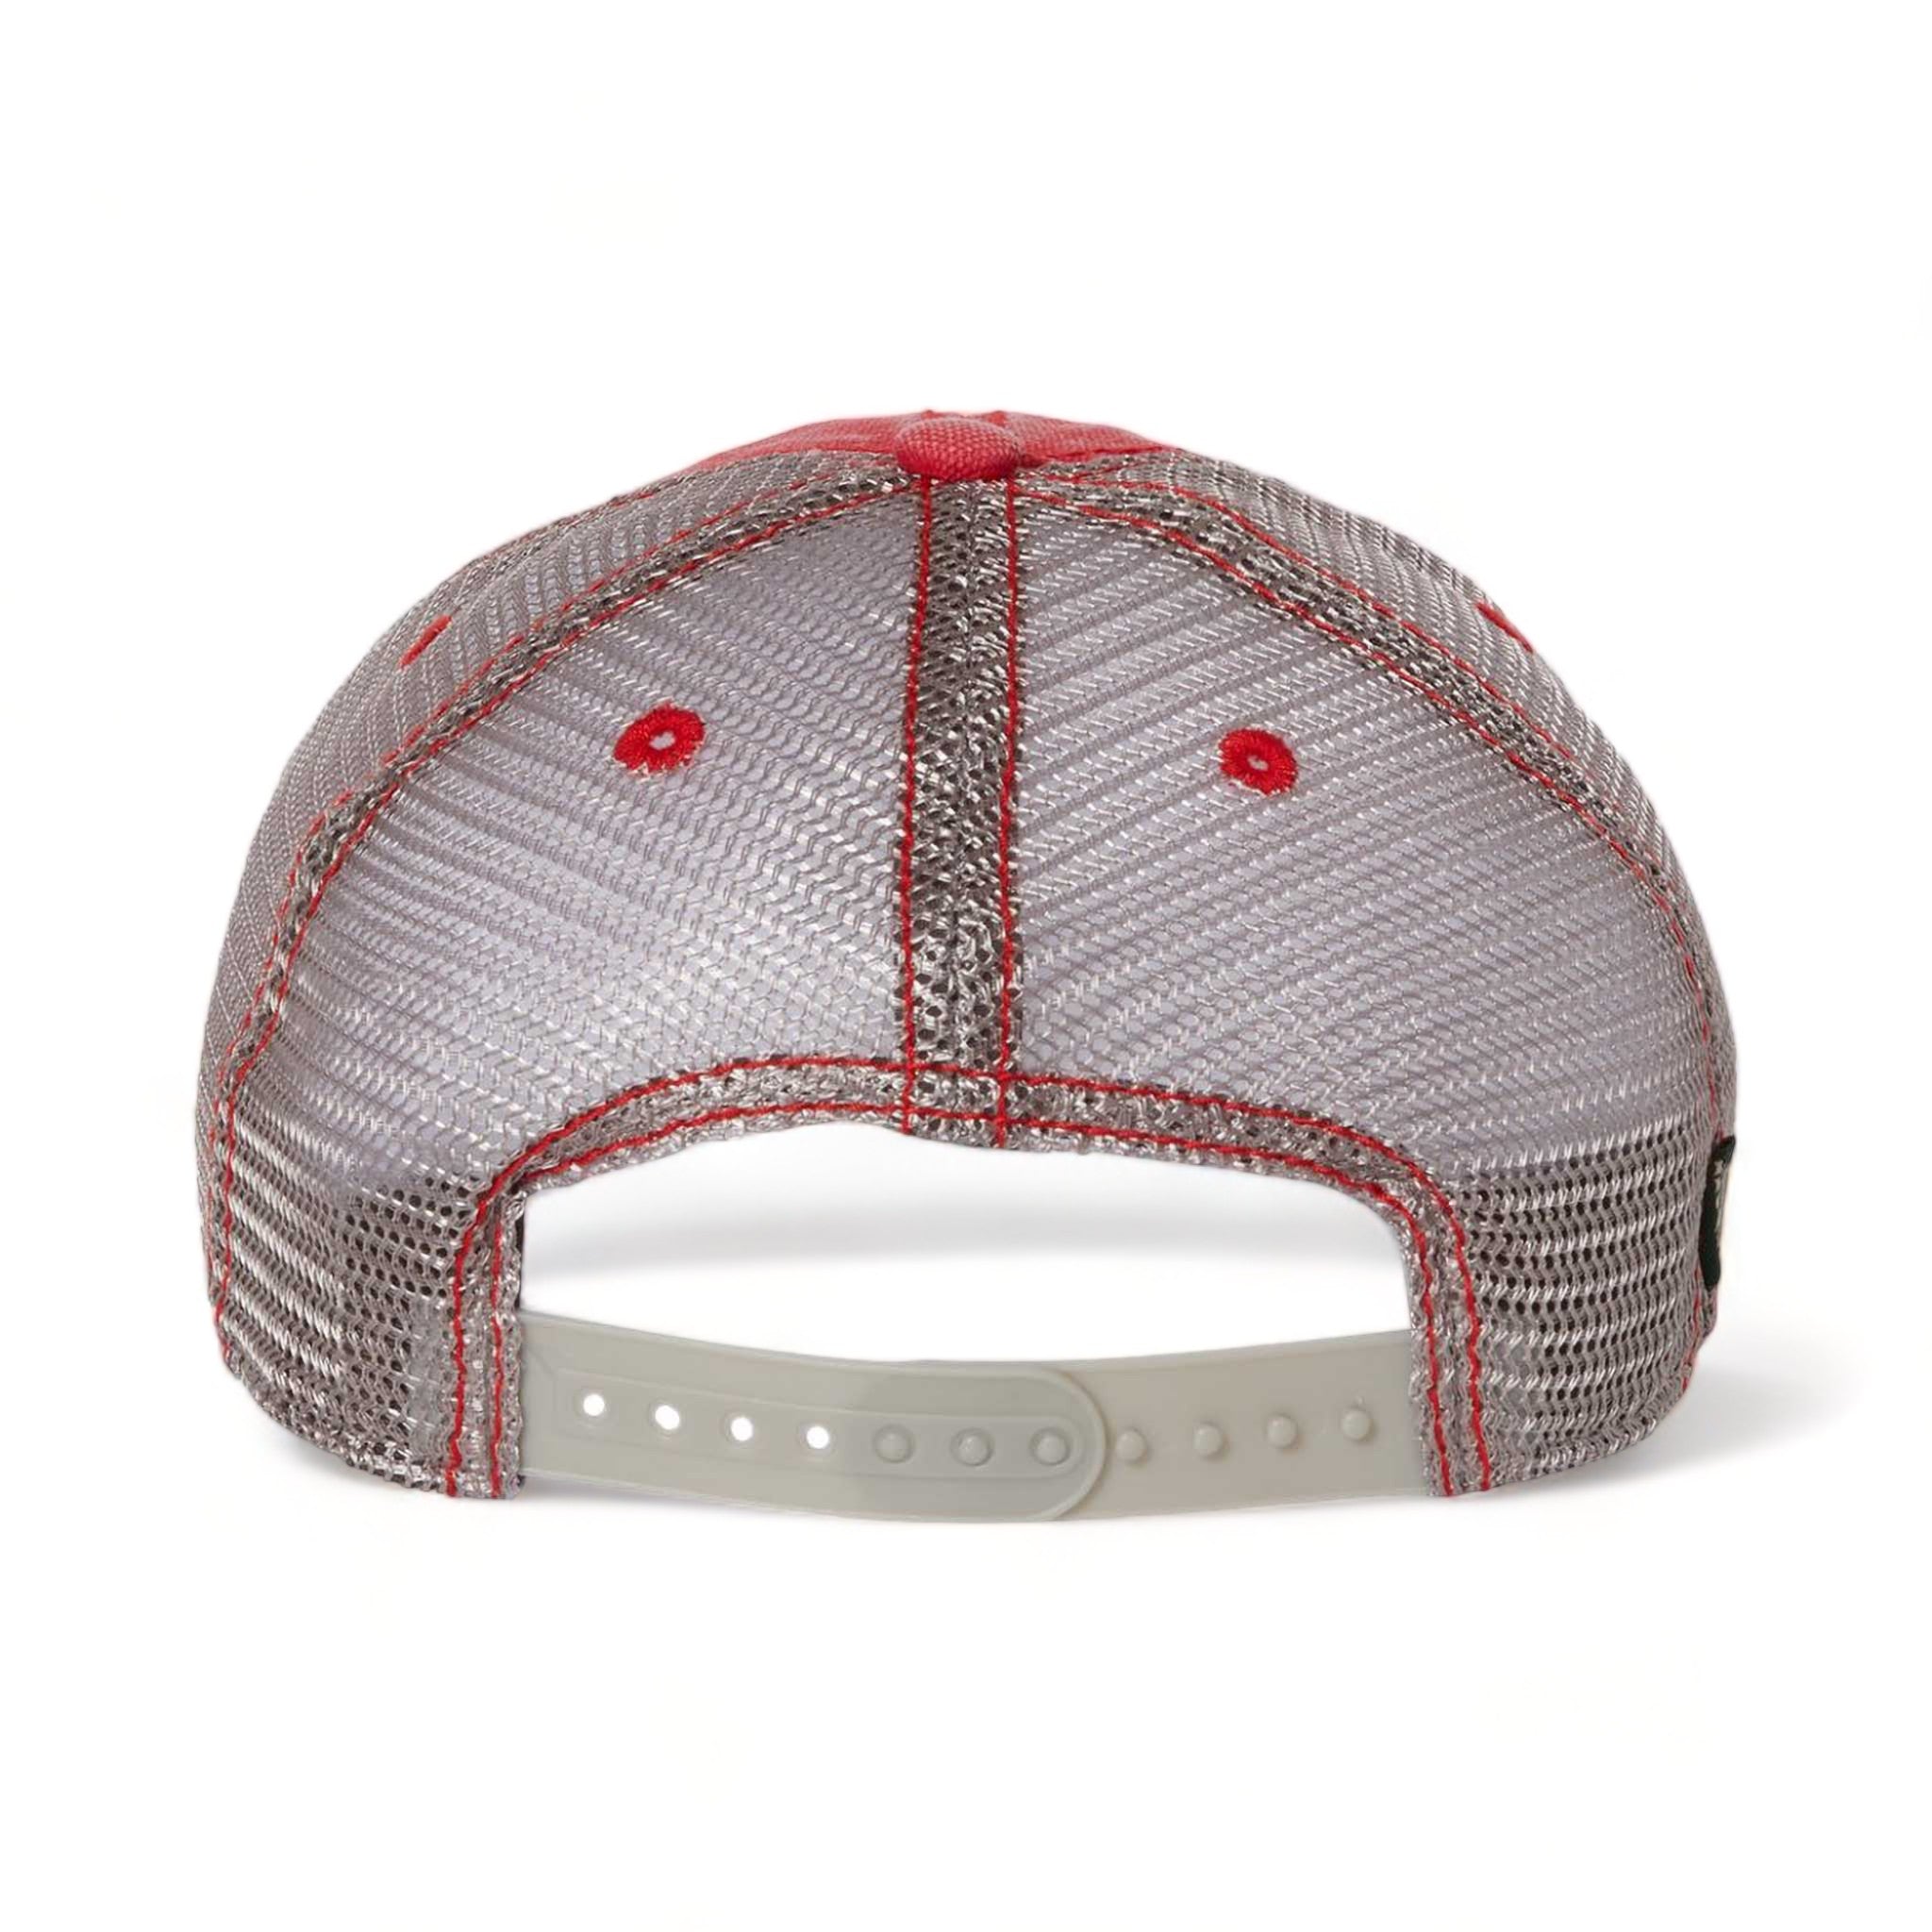 Back view of LEGACY DTA custom hat in scarlet red and grey